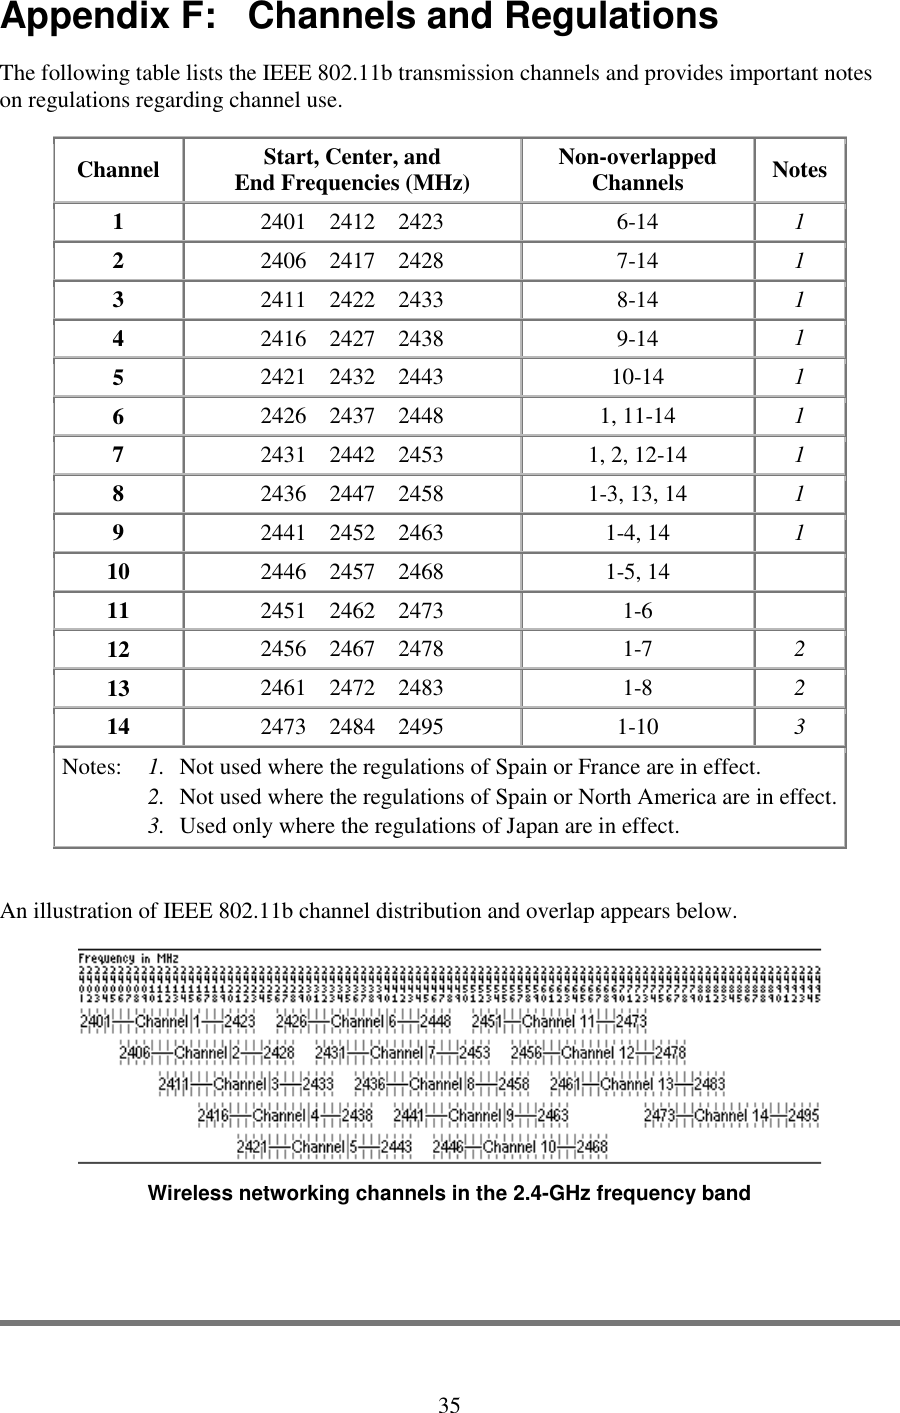   35 Appendix F:   Channels and Regulations  The following table lists the IEEE 802.11b transmission channels and provides important notes on regulations regarding channel use. Channel  Start, Center, and End Frequencies (MHz)  Non-overlapped Channels  Notes 1  2401    2412    2423  6-14  1 2  2406    2417    2428  7-14  1 3  2411    2422    2433  8-14  1 4  2416    2427    2438  9-14  1 5  2421    2432    2443  10-14  1 6  2426    2437    2448  1, 11-14  1 7  2431    2442    2453  1, 2, 12-14  1 8  2436    2447    2458  1-3, 13, 14  1 9  2441    2452    2463  1-4, 14  1 10  2446    2457    2468  1-5, 14    11  2451    2462    2473  1-6    12  2456    2467    2478  1-7  2 13  2461    2472    2483  1-8  2 14  2473    2484    2495  1-10  3 1.   Not used where the regulations of Spain or France are in effect. 2.   Not used where the regulations of Spain or North America are in effect. Notes:     3.   Used only where the regulations of Japan are in effect.   An illustration of IEEE 802.11b channel distribution and overlap appears below.  Wireless networking channels in the 2.4-GHz frequency band  